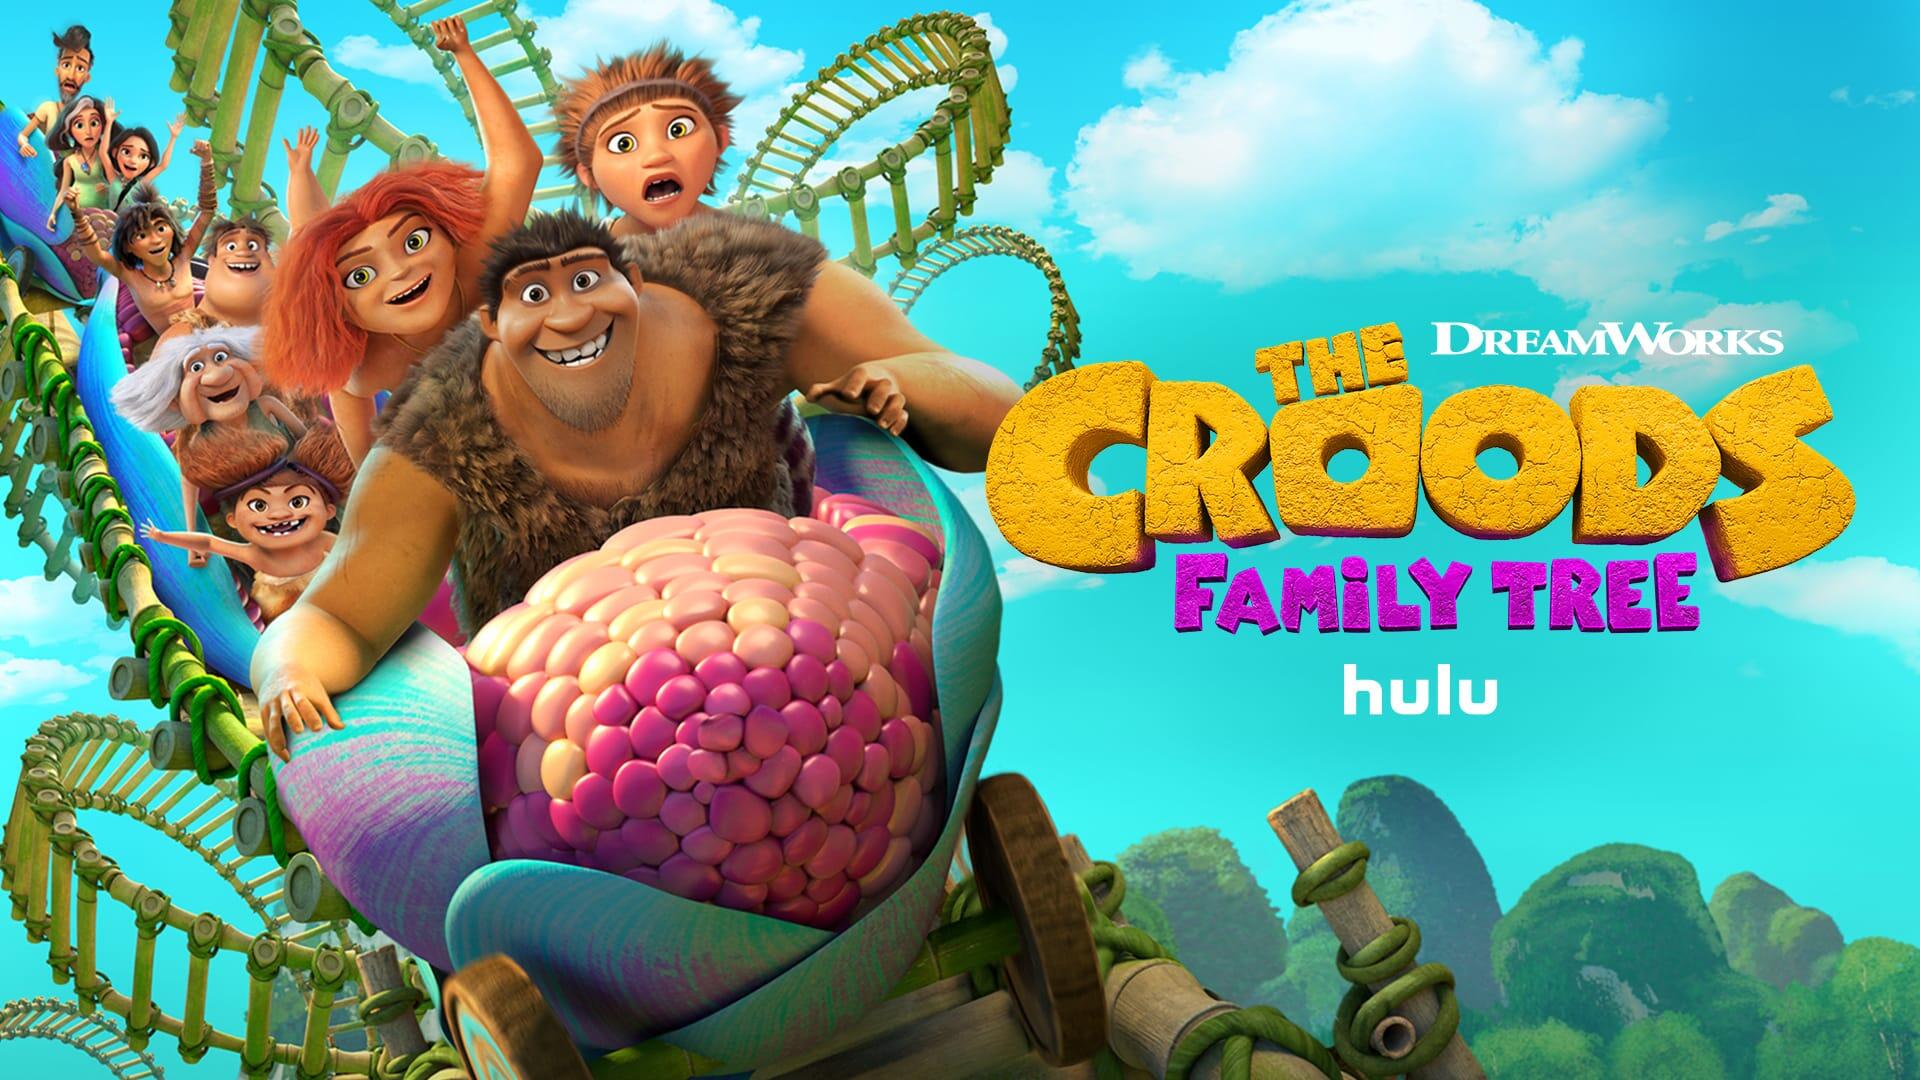 The Croods Family Tree -- Season 3 -- Jealous of the Thunder Sisters, the men on the farm undergo a difficult initiation to join the exclusive tribe of women while Eep and Dawn prepare for the ultimate skate-off with the Punch Monkeys to reclaim their skate spot. As Phil sets on a mission to prove he’s a fun guy, the girls adopt a stranded egg that may not be as innocent as it seems. Prehistory's favorite families return with new shenanigans, hilarious adventures and a whole lot of heart! (Photo courtesy of DreamWorks)